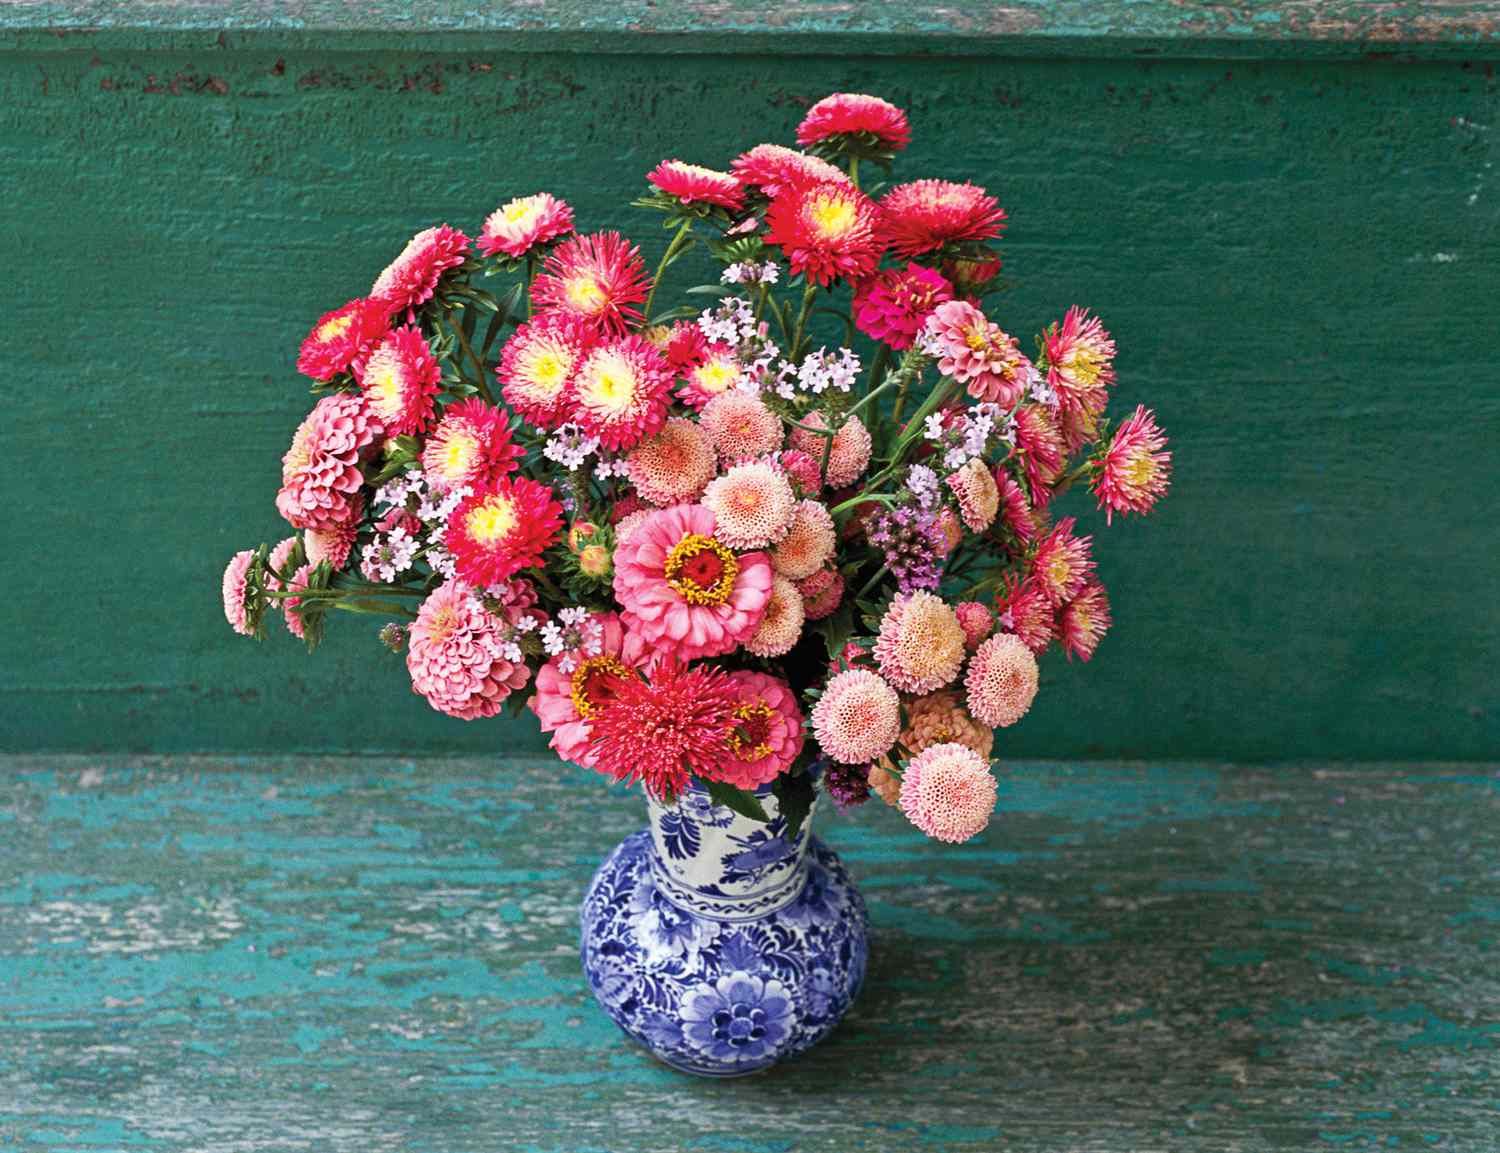 Make Sure You Include These Long-Lasting Cut Flowers in All of Your Arrangements - BH&G